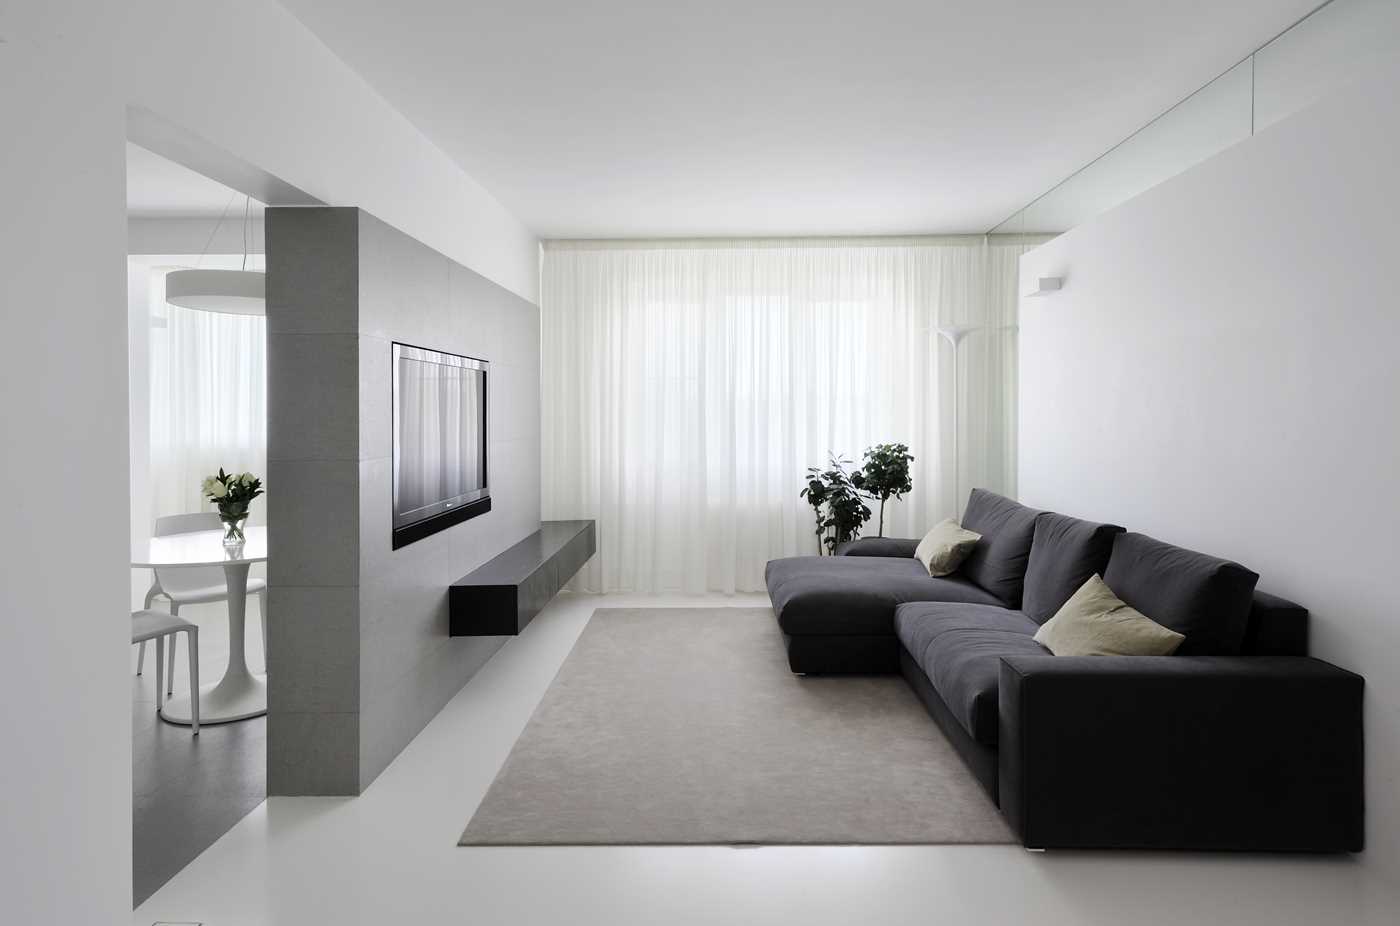 version of the light design of the living room in the style of minimalism